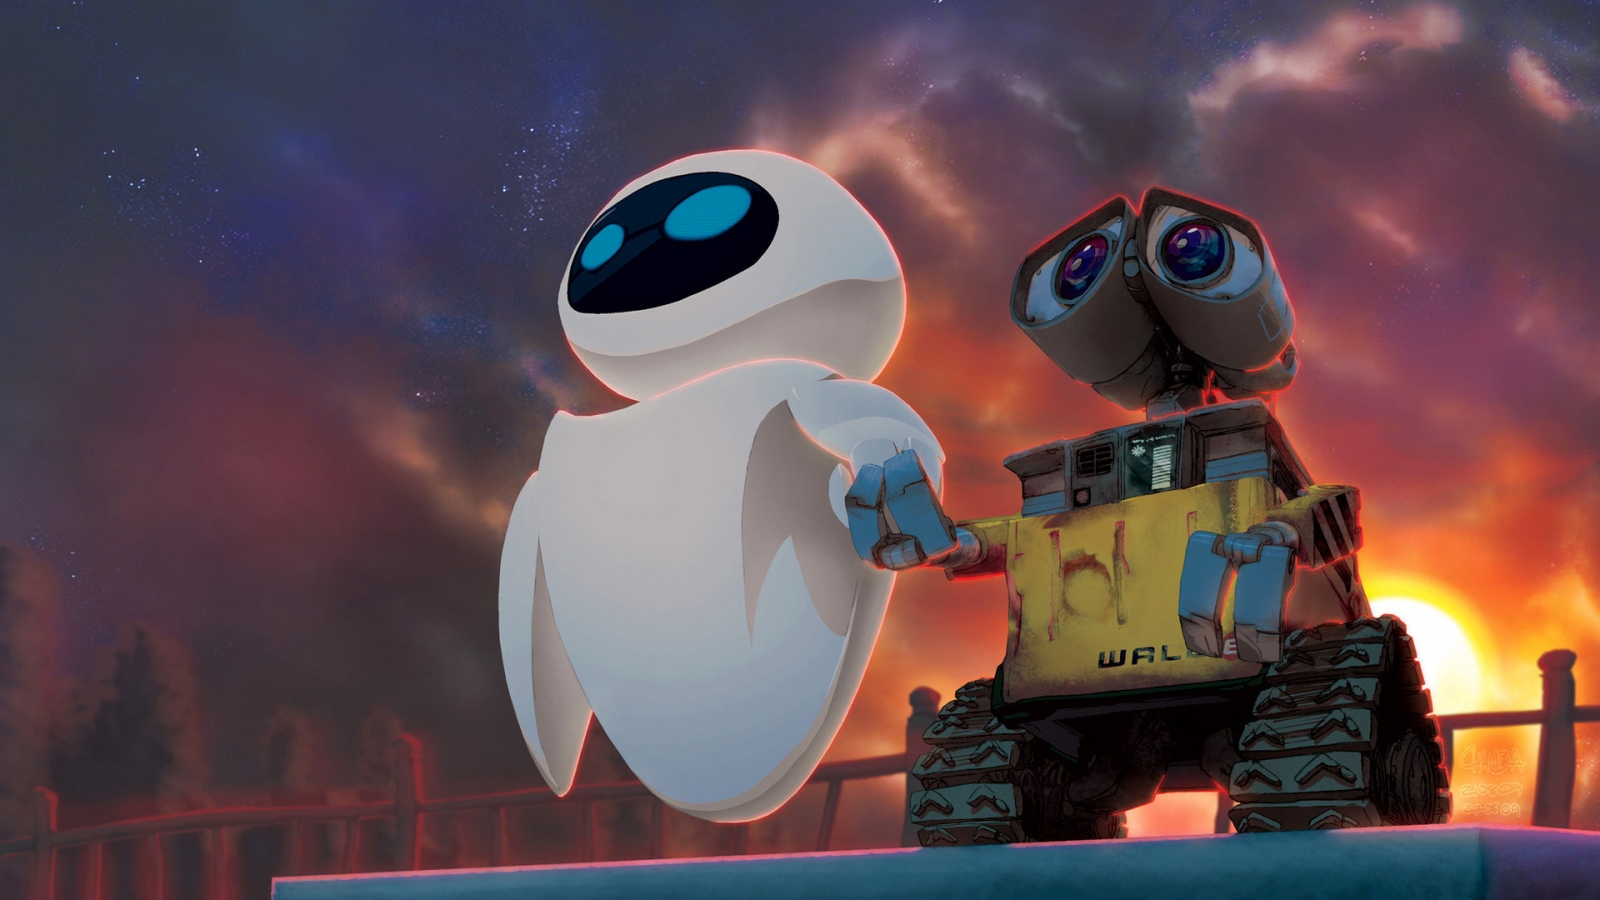 Walle Cartooned for 1600 x 900 HDTV resolution